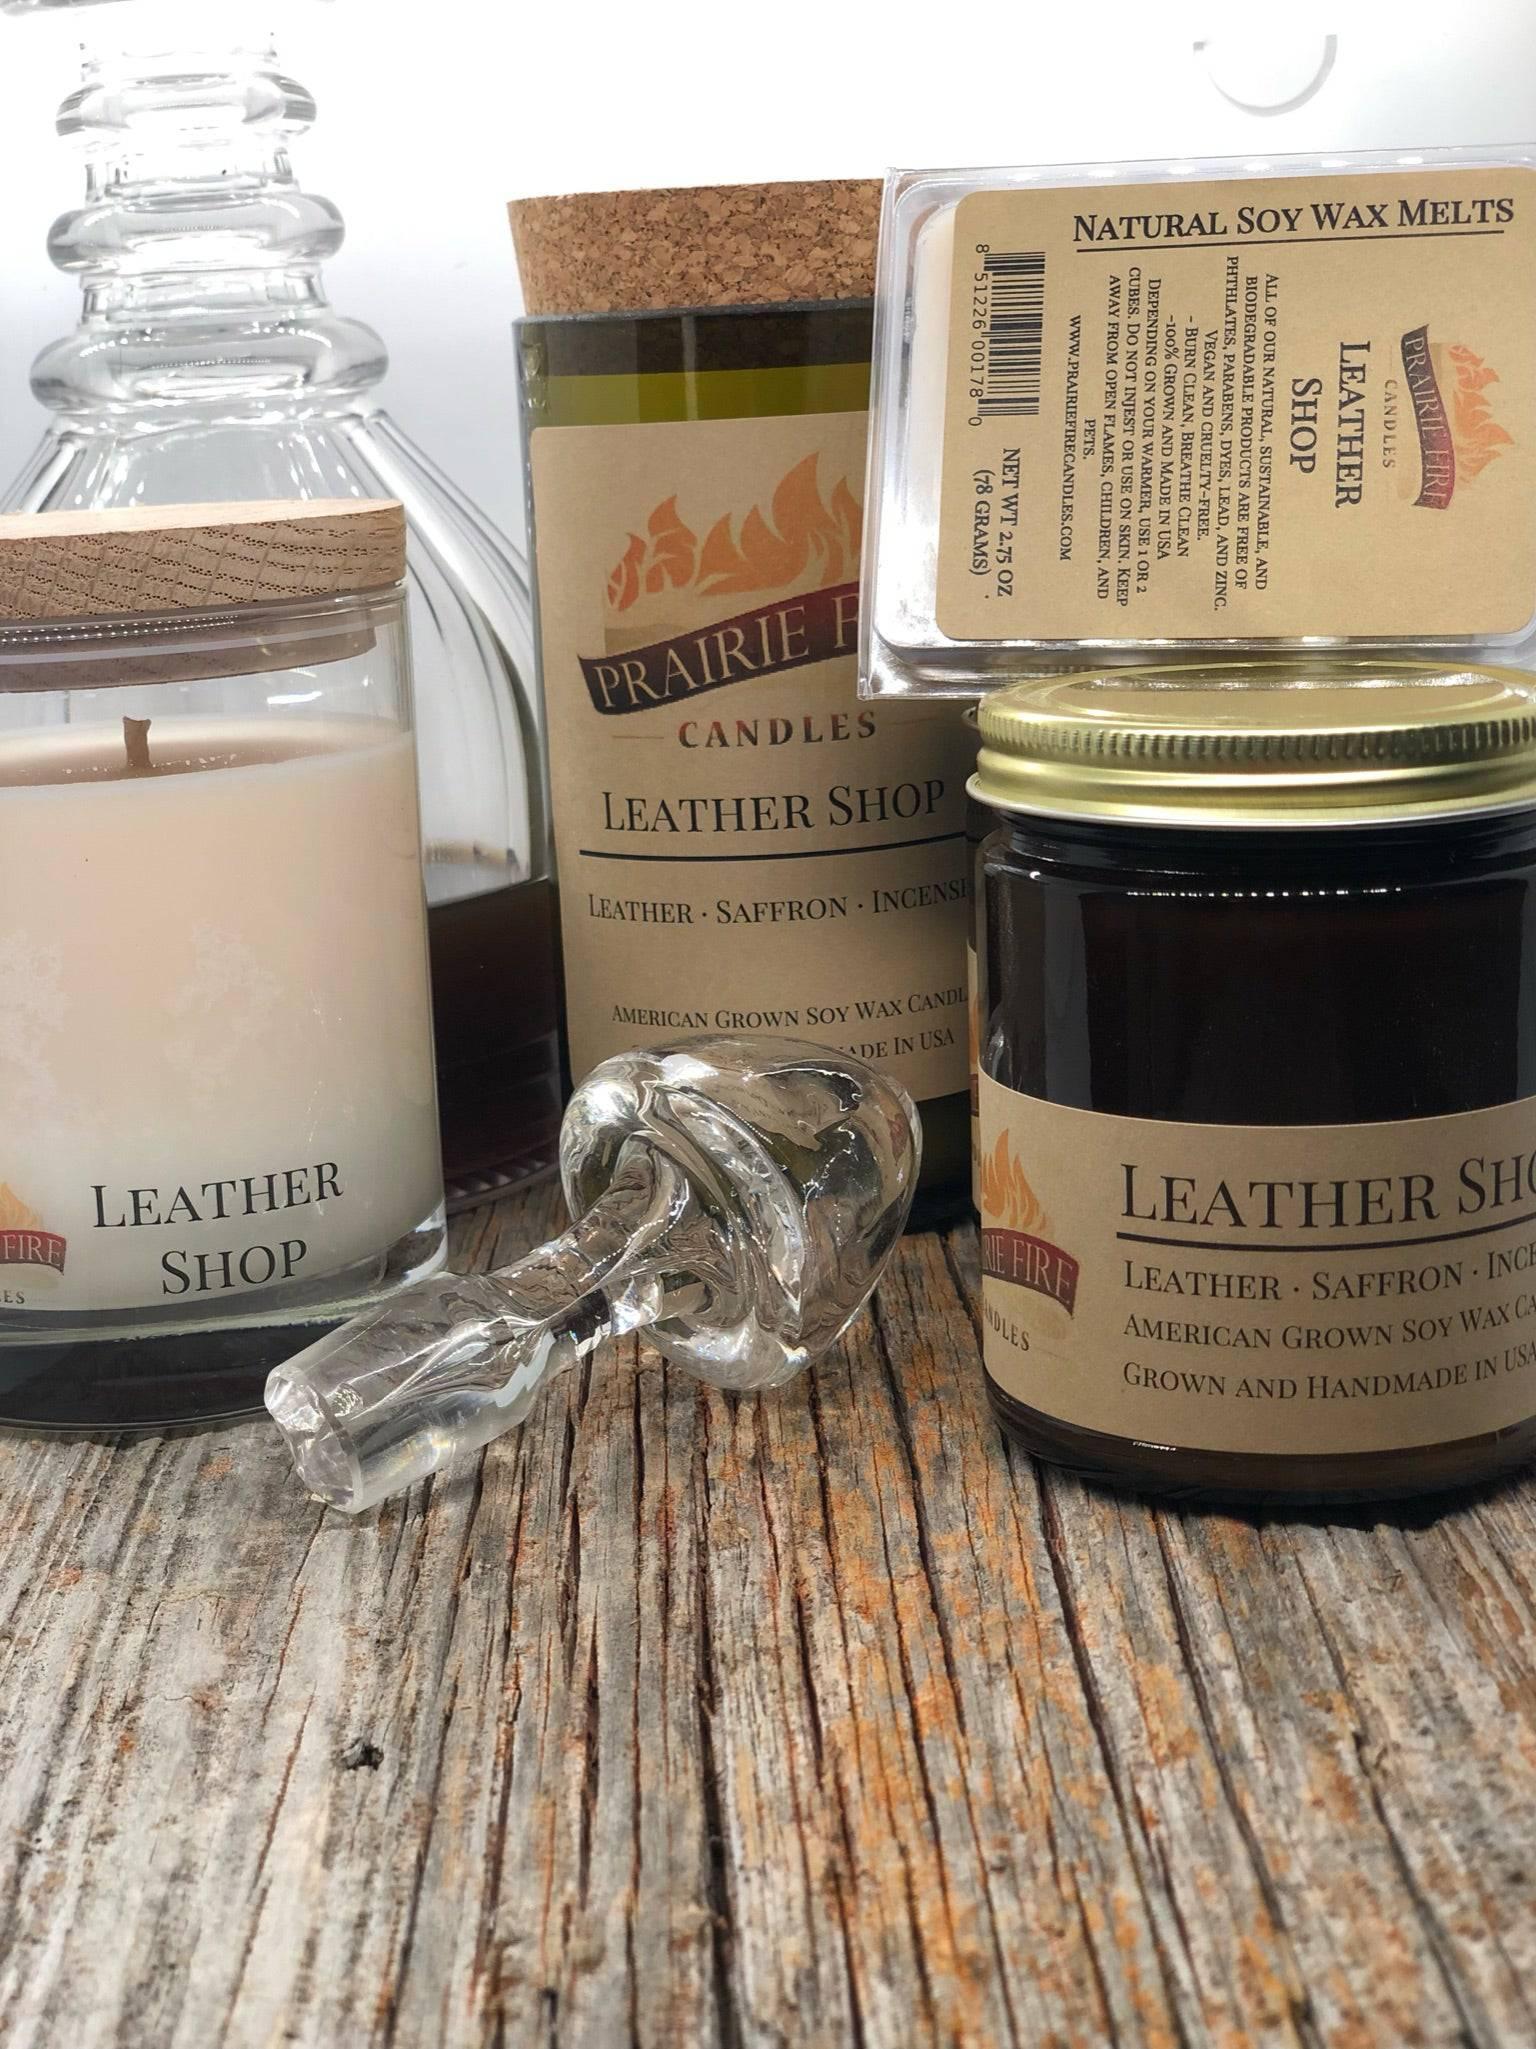 Leather Shop Soy Wax Candle | Repurposed Wine Bottle Candle Natural Cork | Handmade in USA Candle | Eco-Friendly Candle | Non-Toxic Soy Candle - Prairie Fire Candles